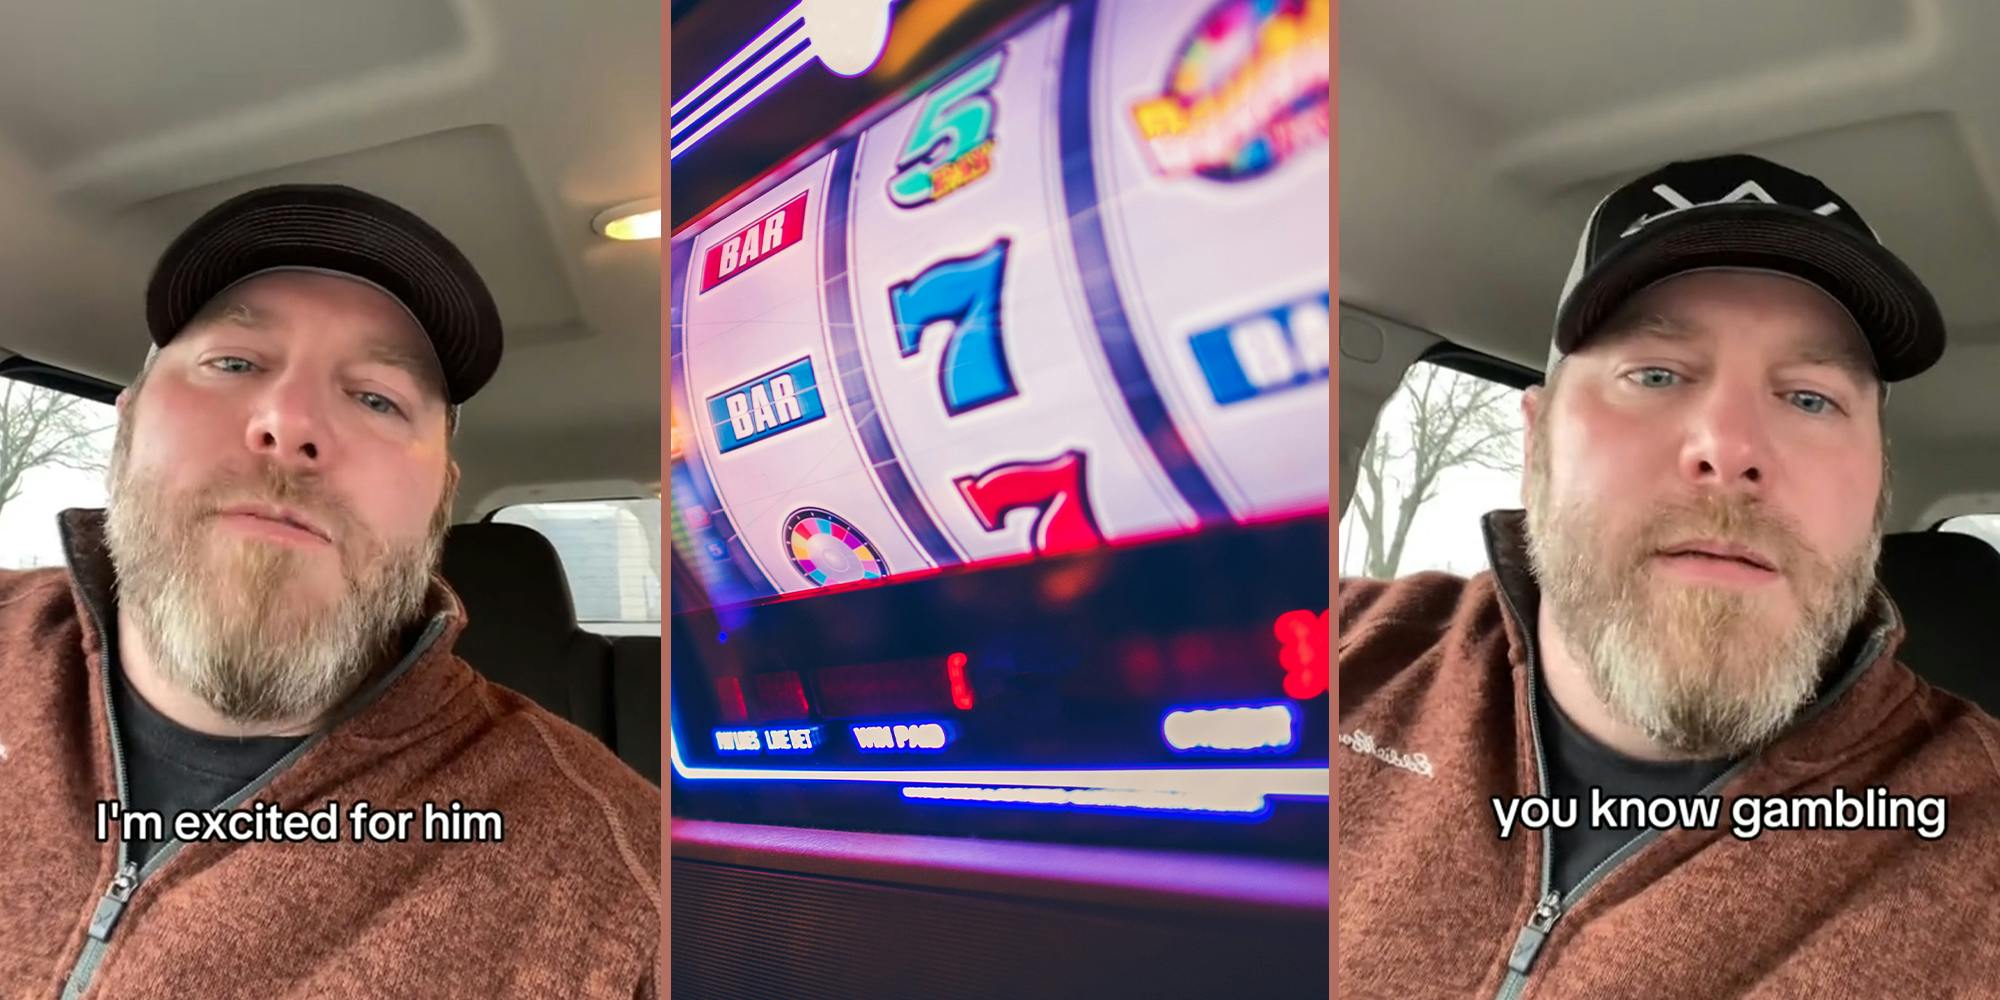 Man buys $240 round for the bar after winning big at slots and says he'll tip later. It doesn't go well